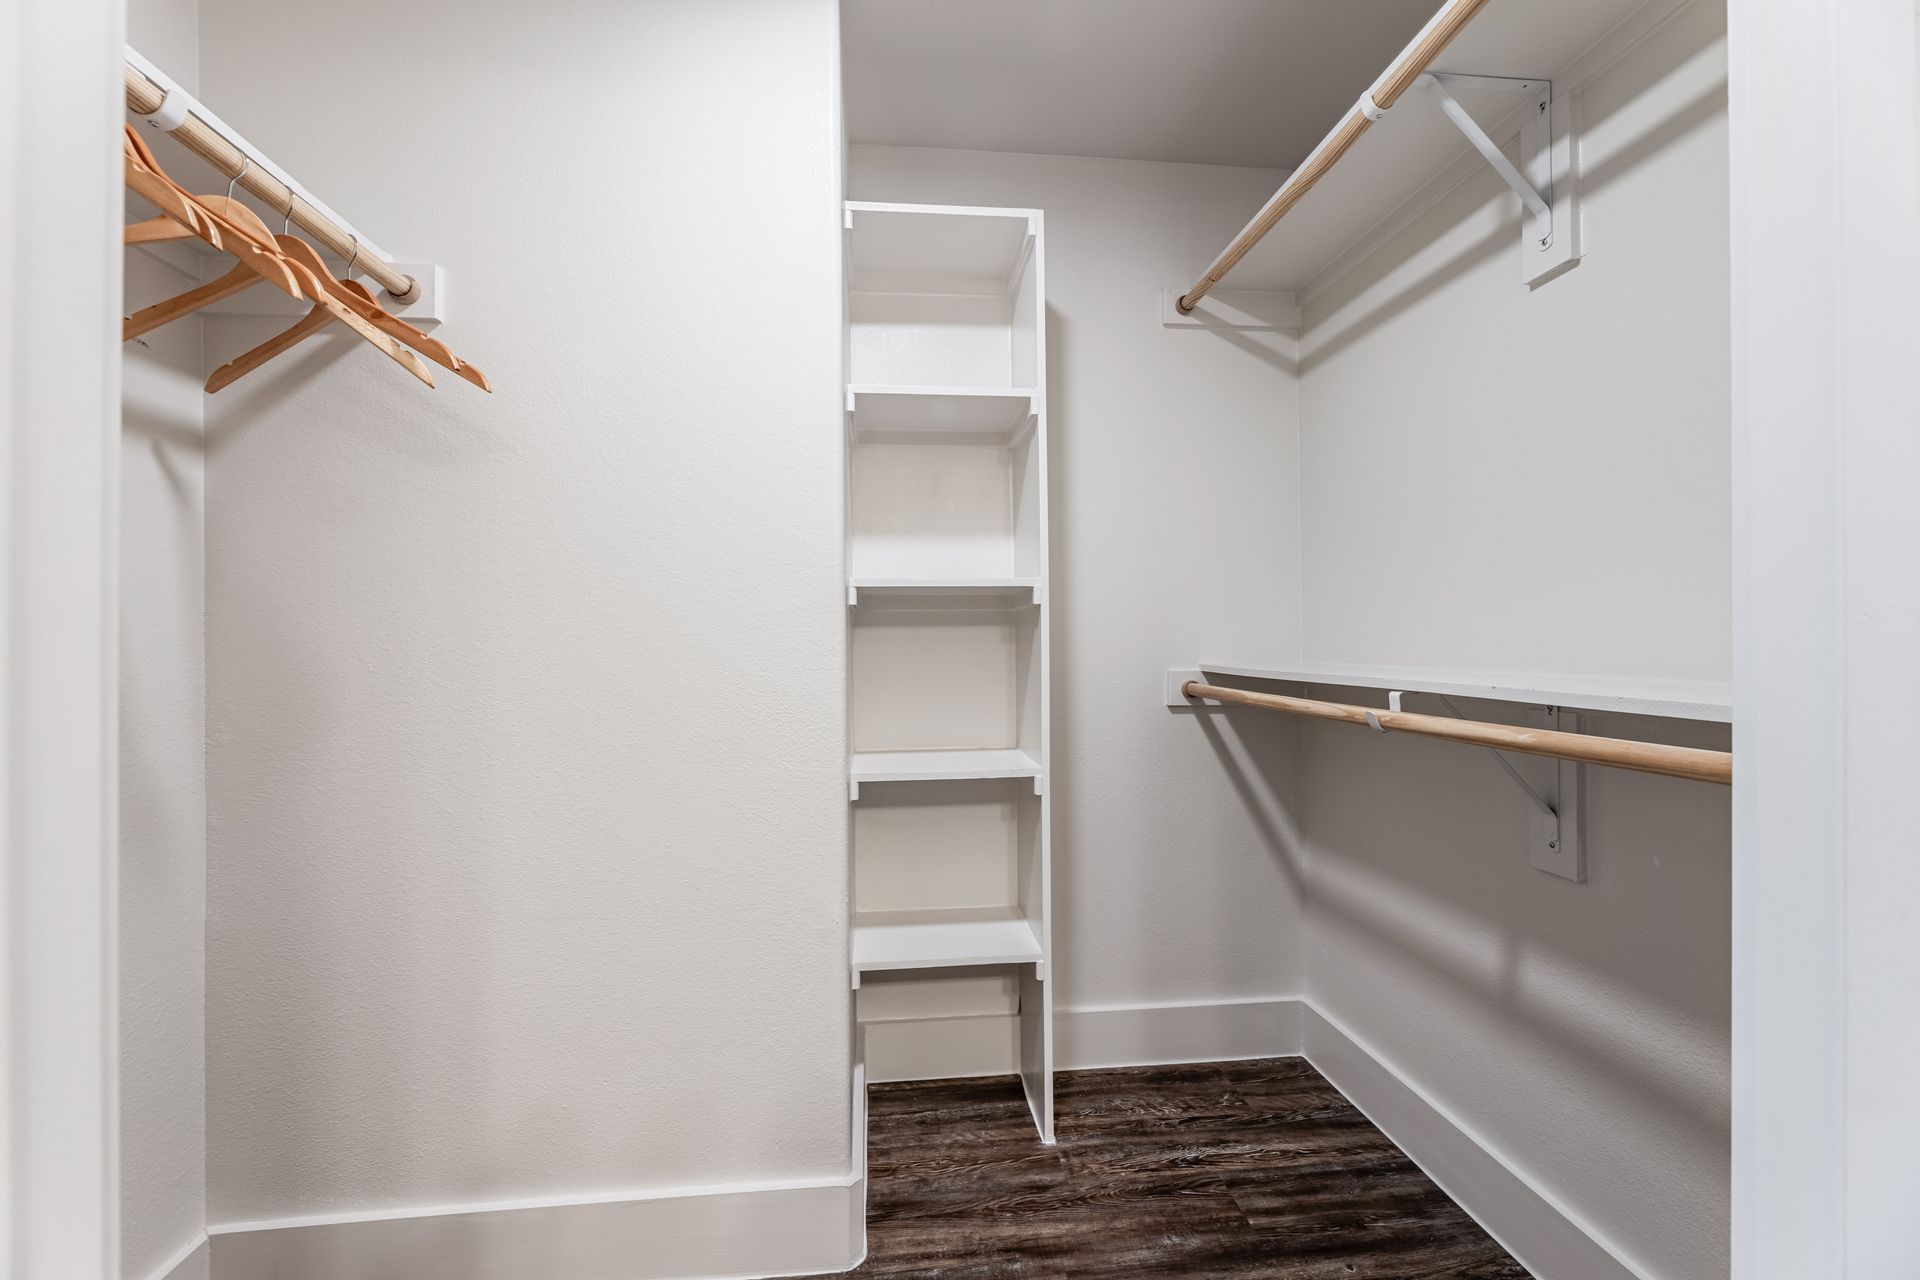 A walk-in closet with a wooden floor and shelves at Parkside at Craig Ranch.